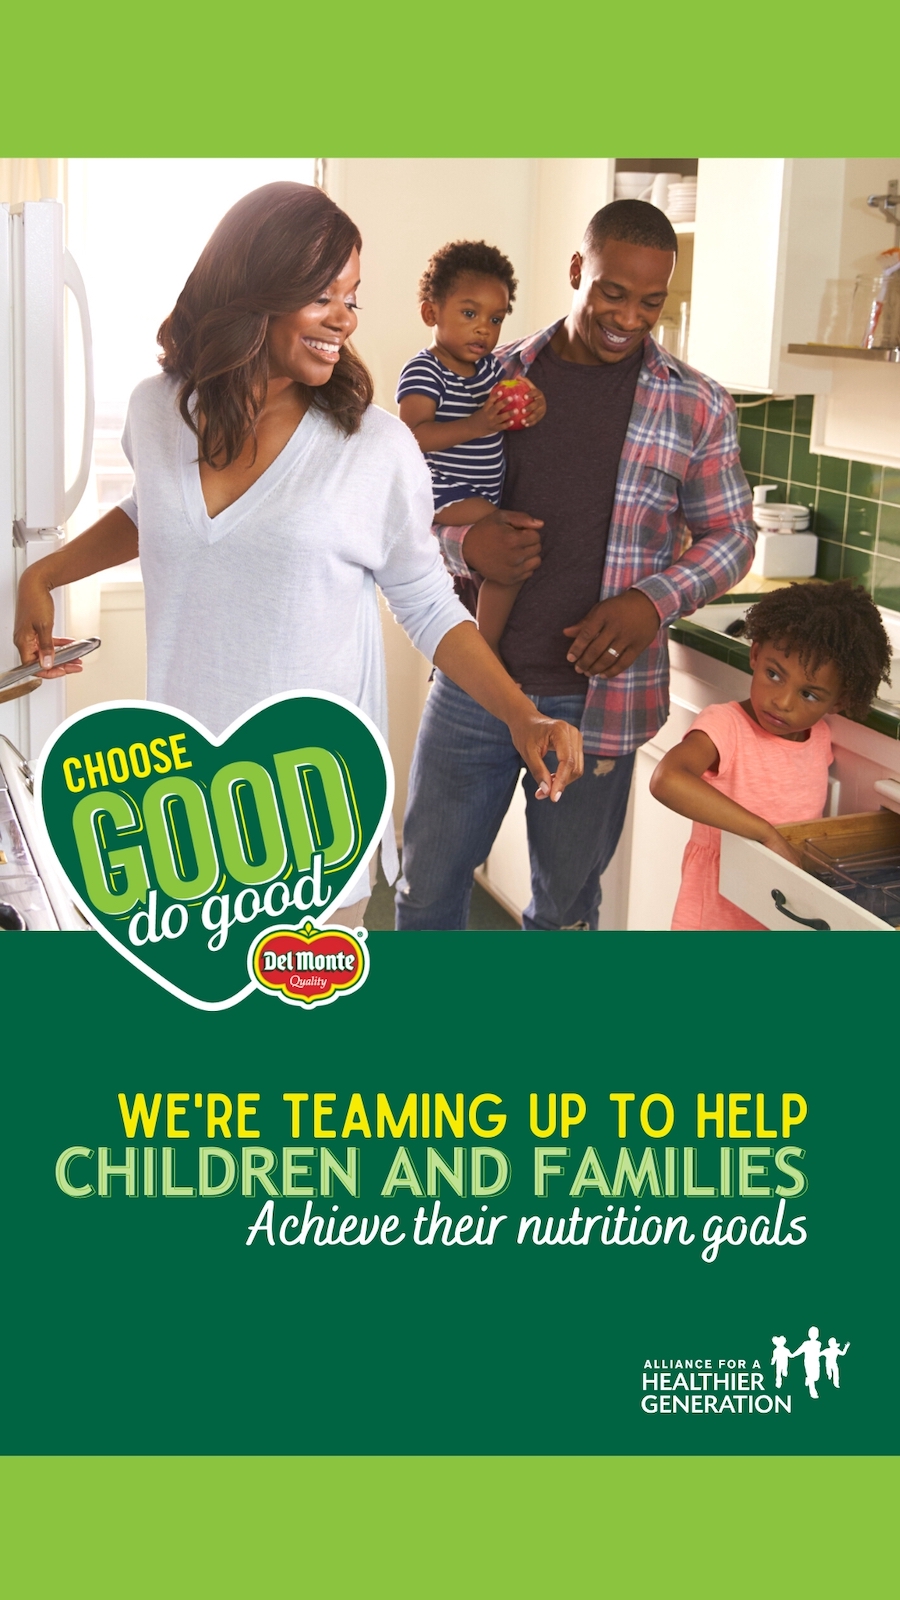 Del Monte Foods Nourishes the Planet by Reducing Food Waste